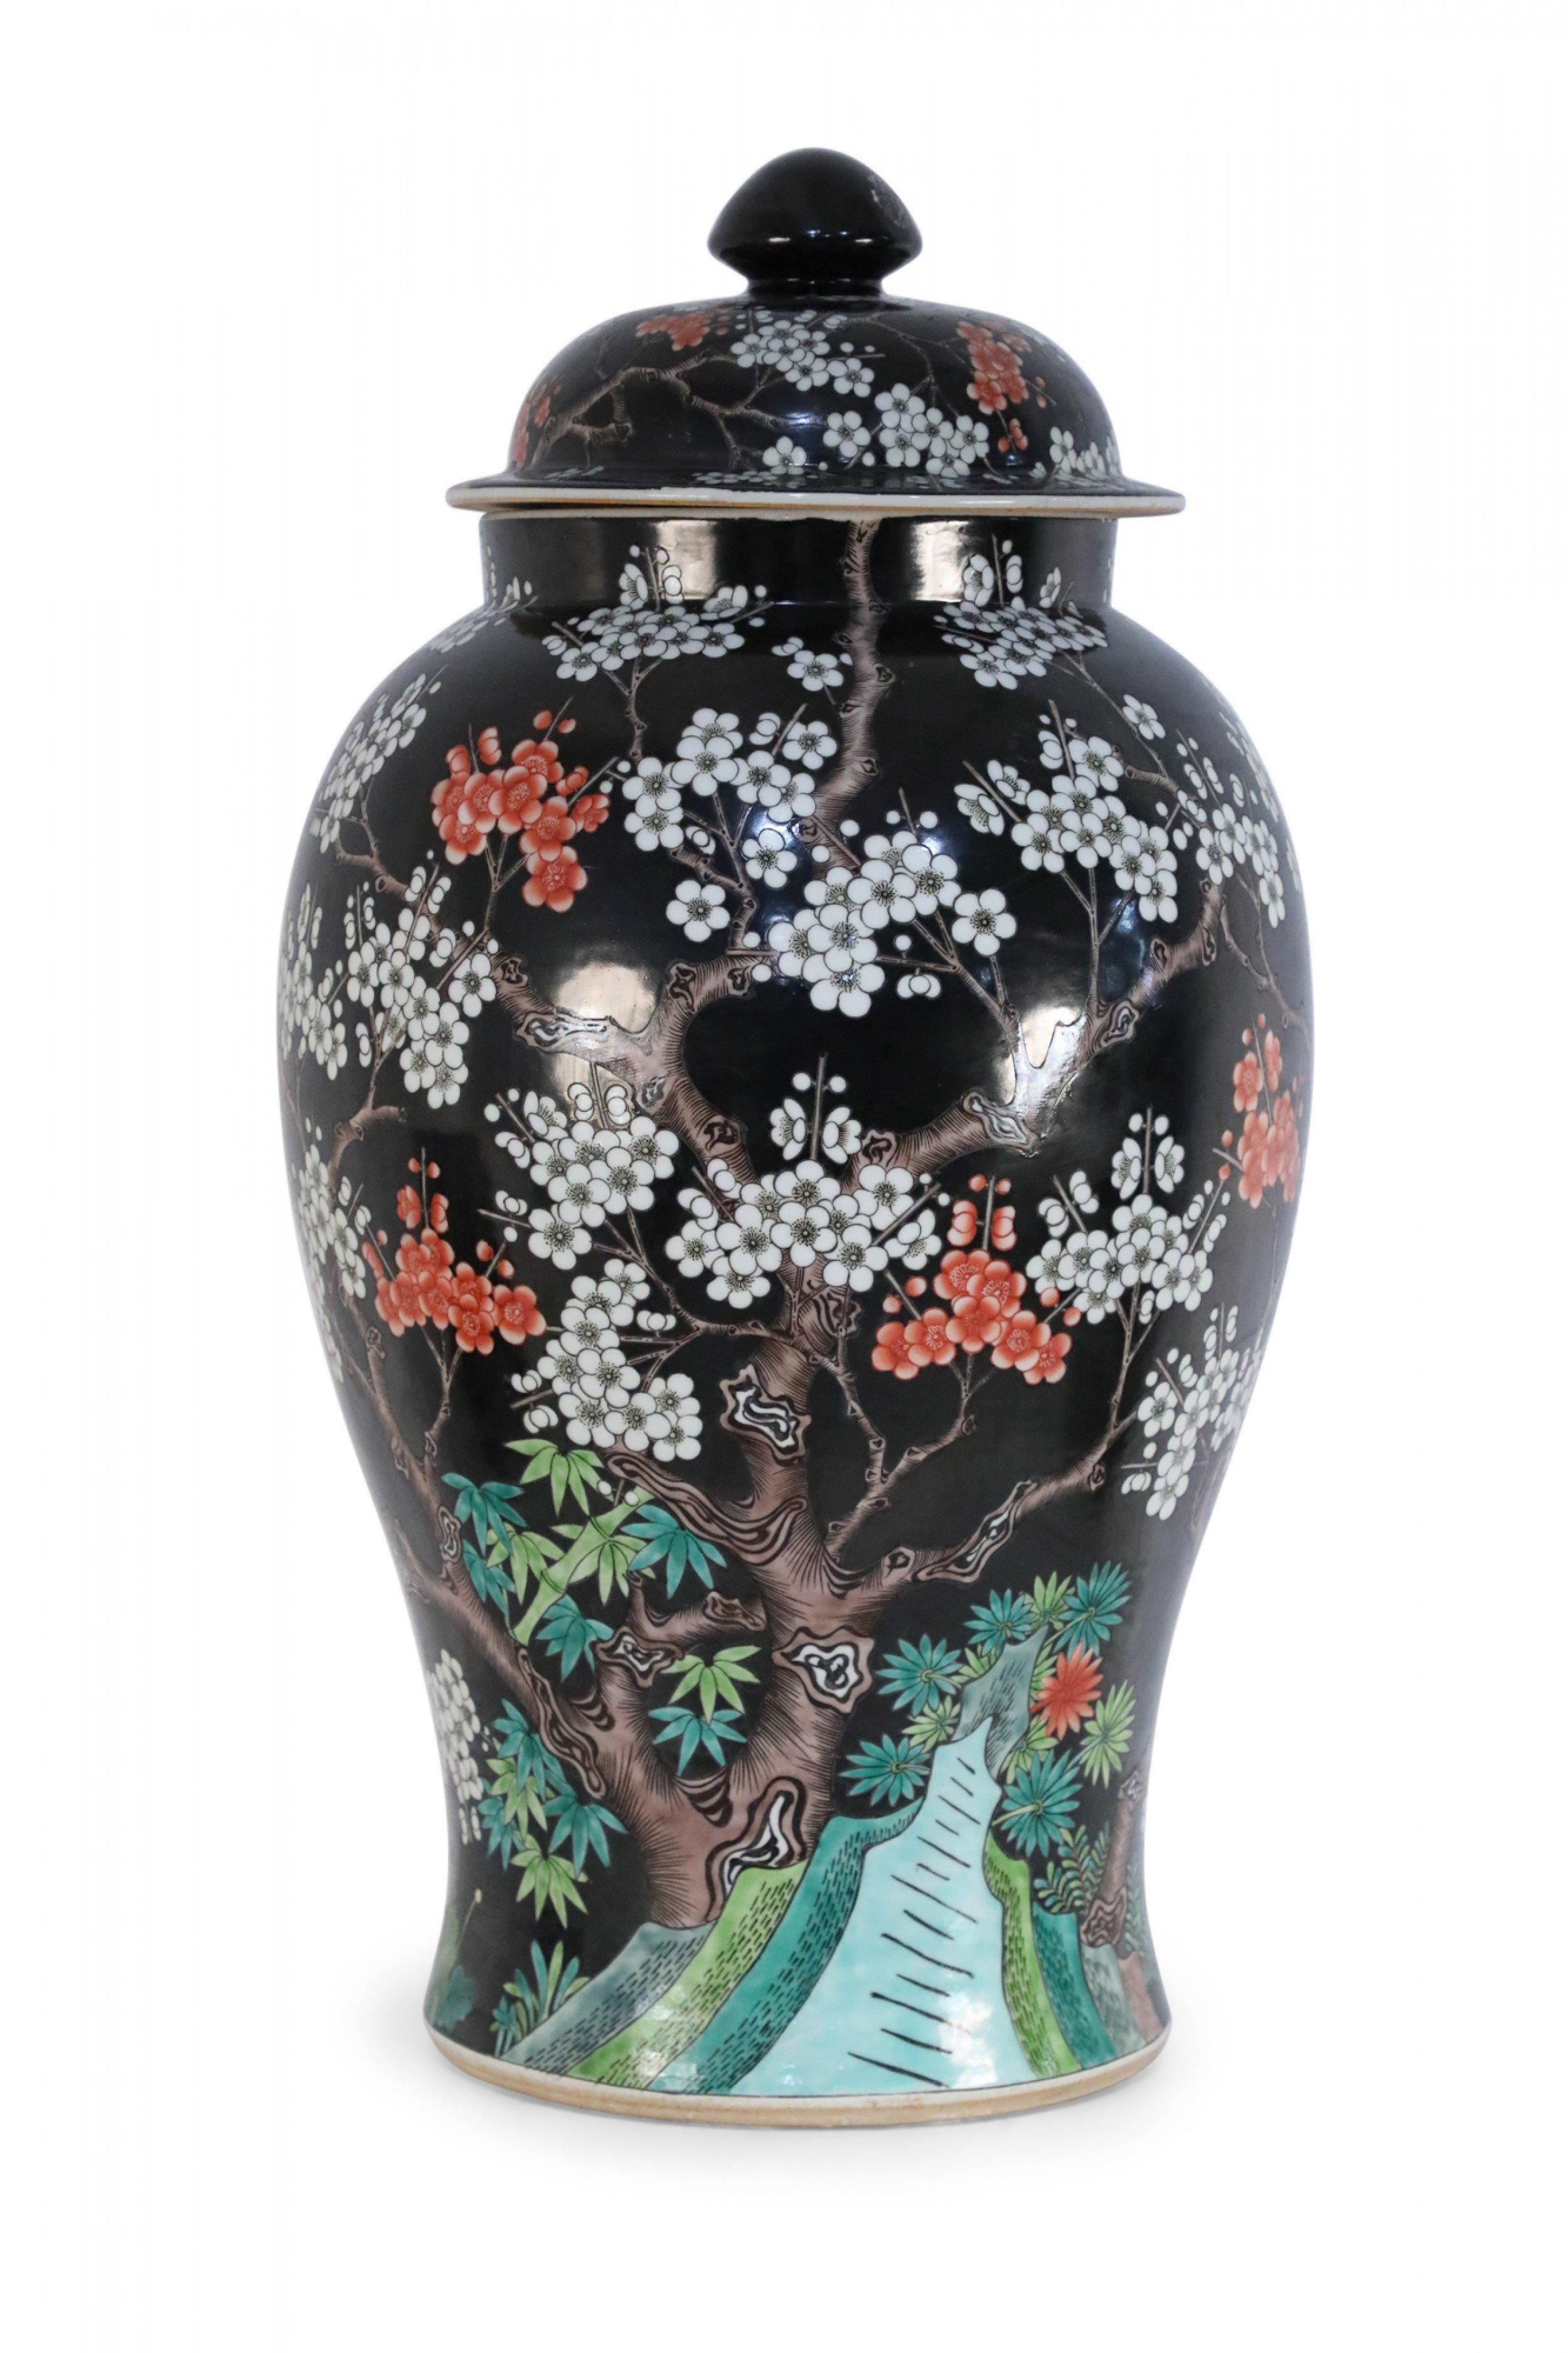 Chinese black porcelain jar with red and white cherry blossom trees growing from a green pastoral scene at the base.
 